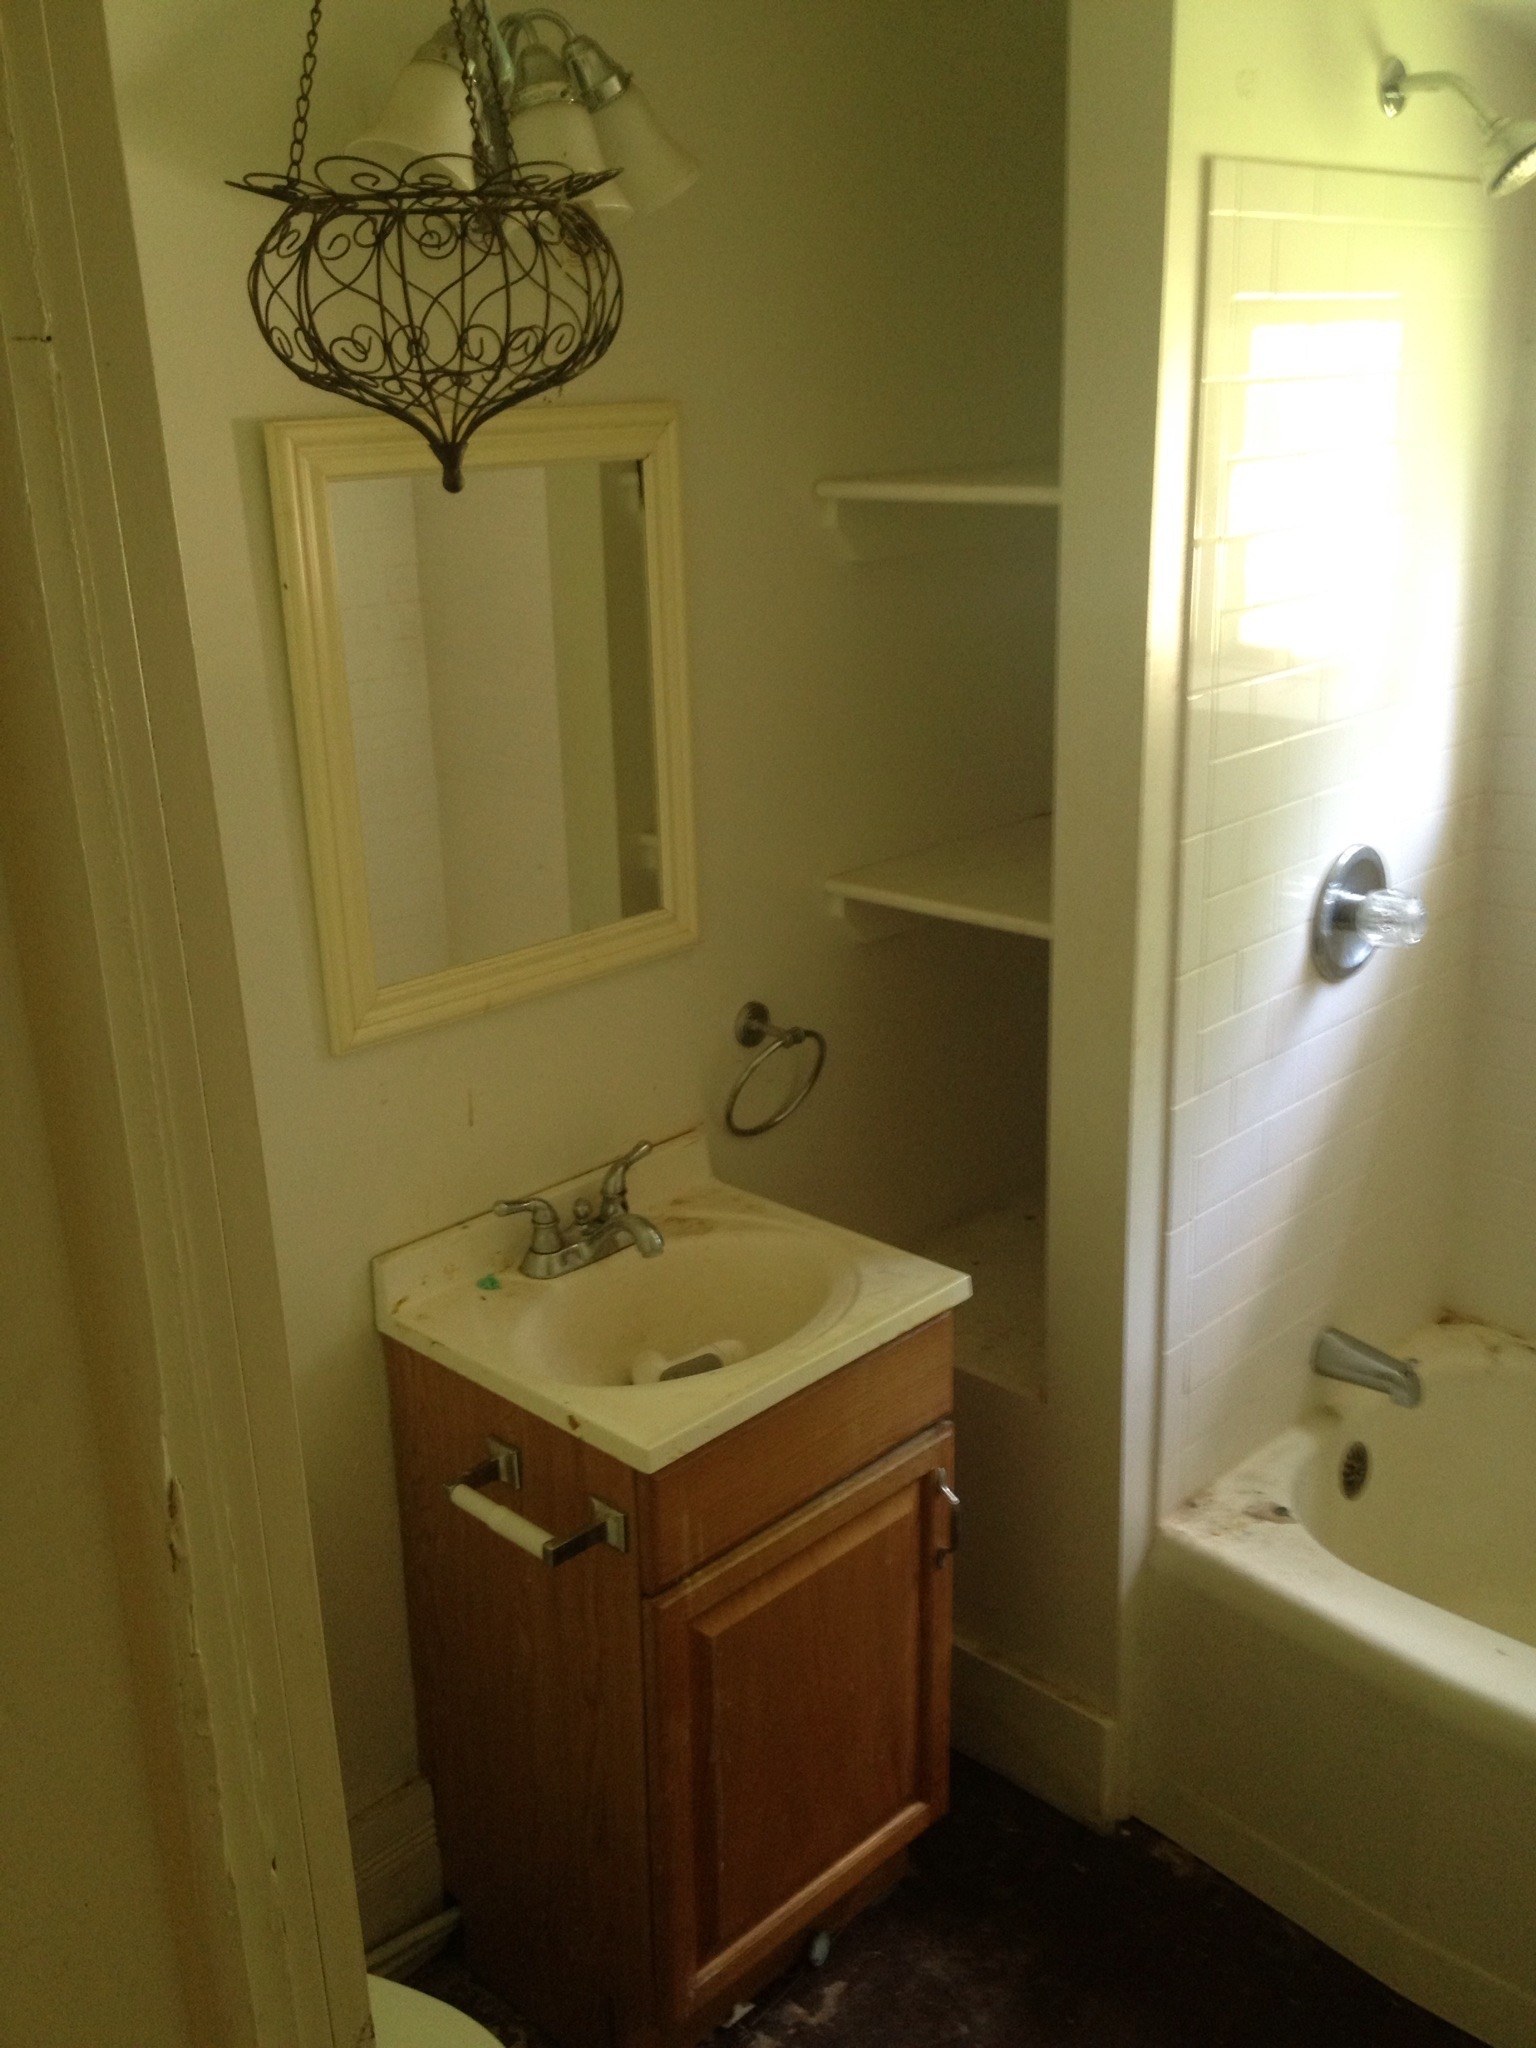 How to turn an old fashioned bathroom into modern